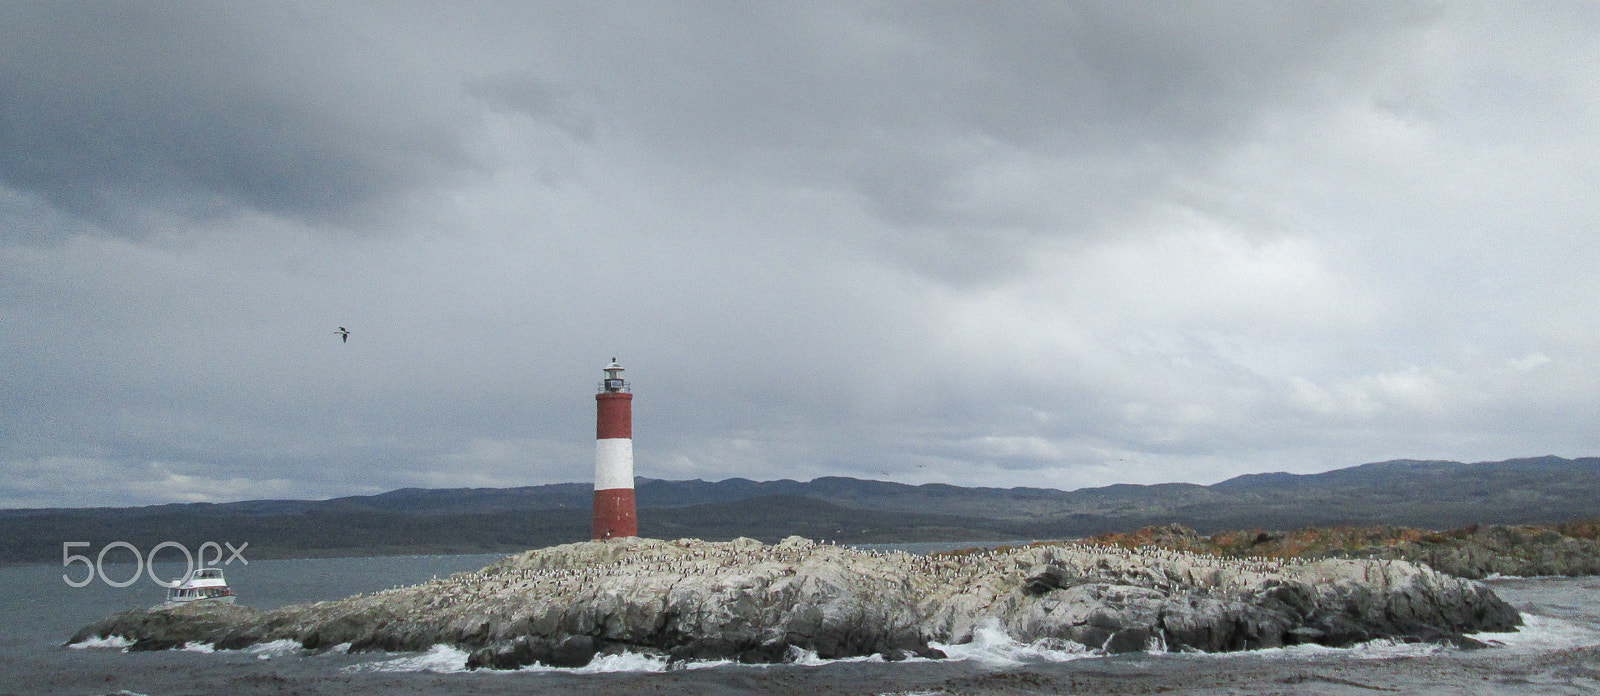 Canon PowerShot A3500 IS sample photo. Beagle channel - ushuaia argentina photography